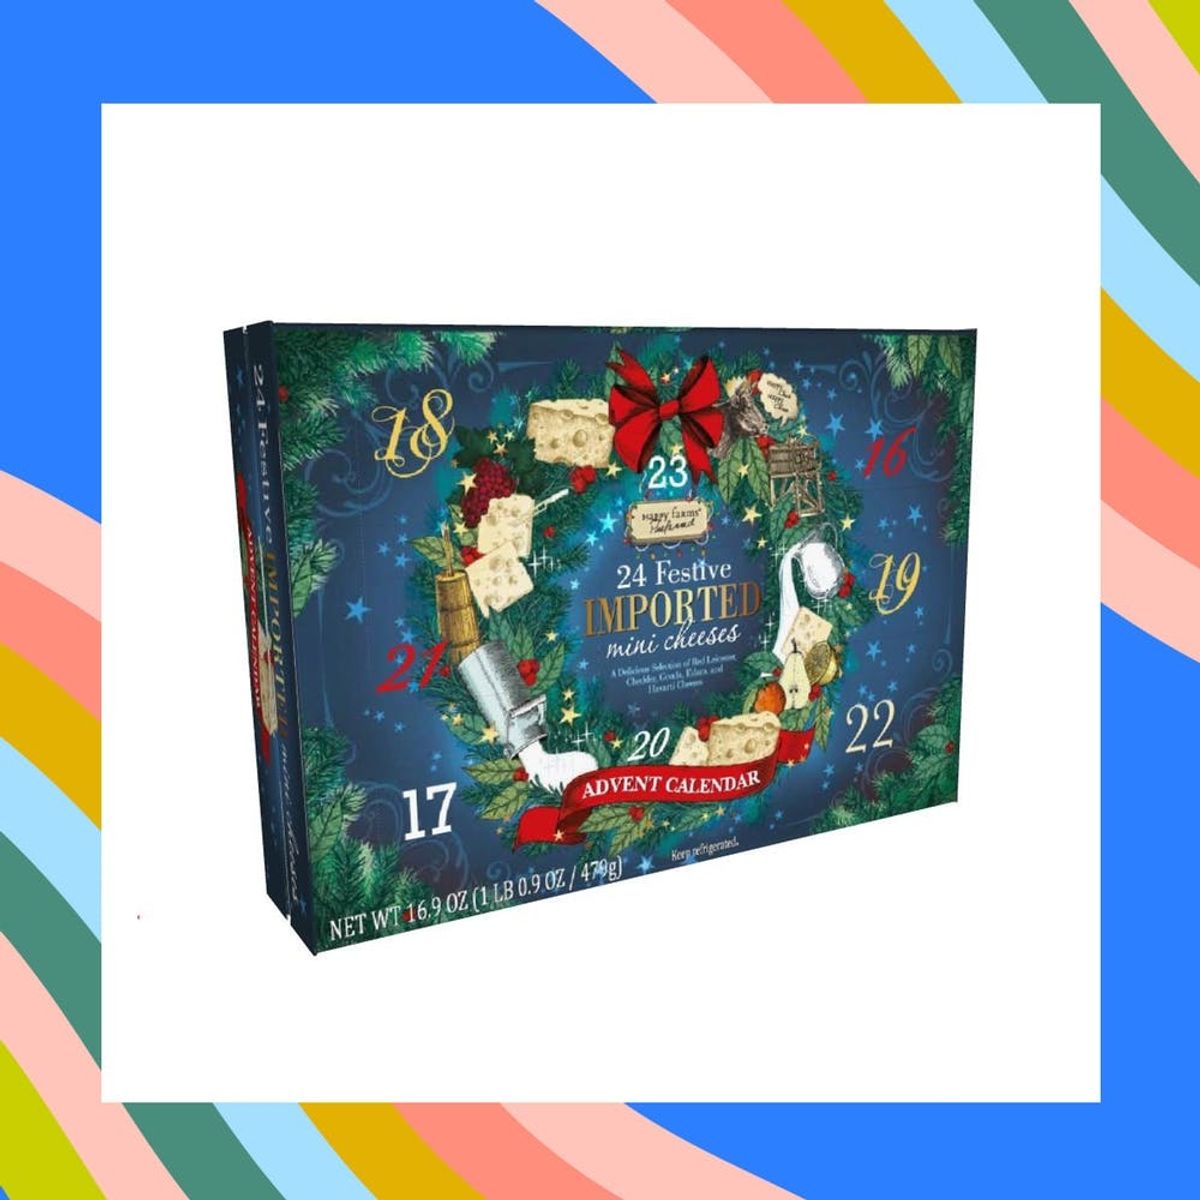 Get Lit Like a Christmas Tree With Aldi’s Wine and Cheese Advent Calendars